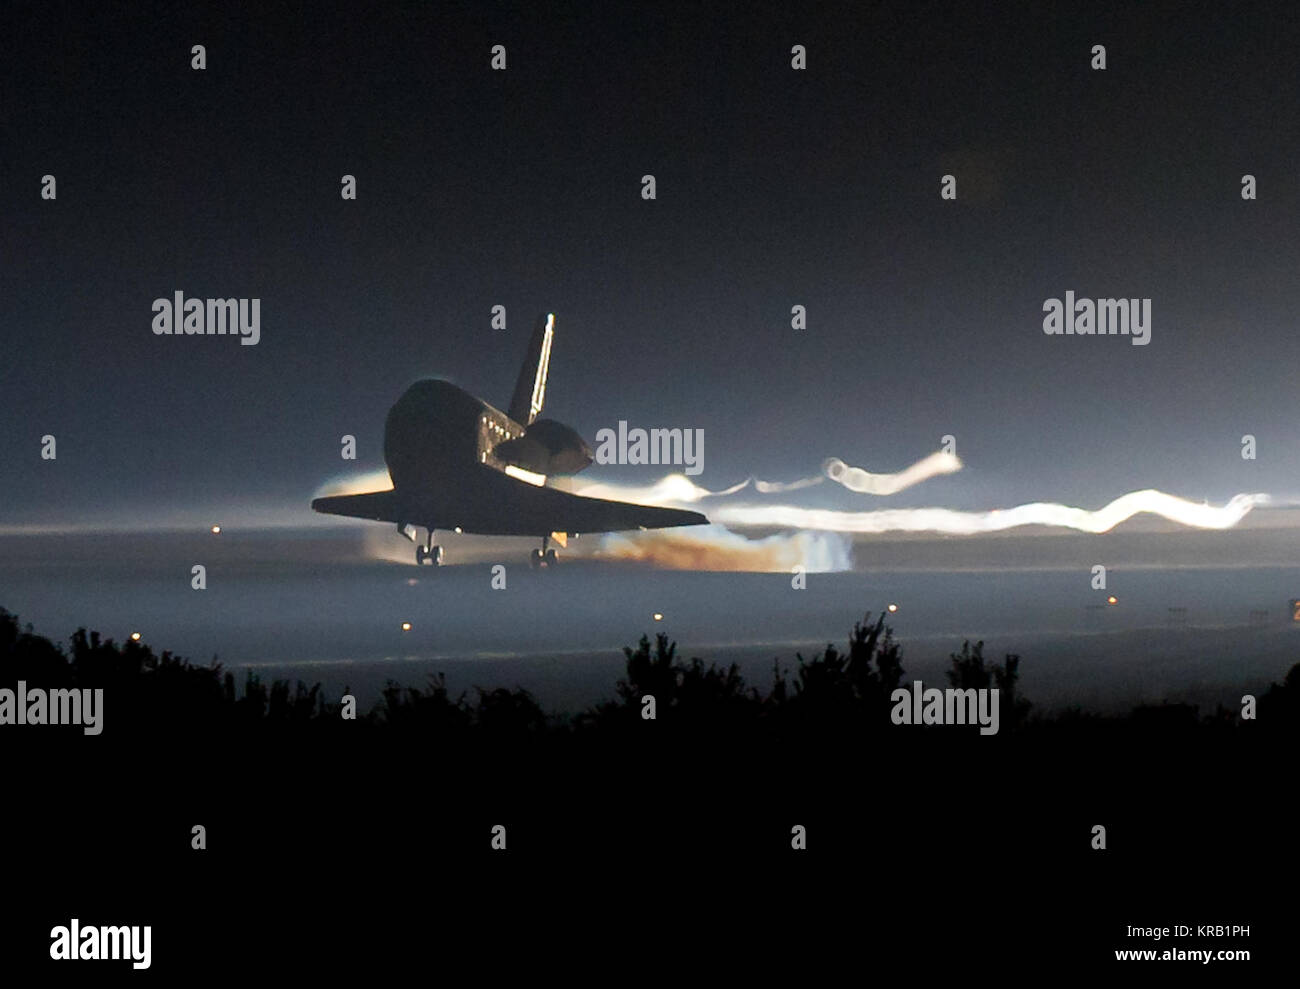 Space shuttle Atlantis (STS-135) touches down at NASA's Kennedy Space Center Shuttle Landing Facility (SLF), completing its 13-day mission to the International Space Station (ISS) and the final flight of the Space Shuttle Program, early Thursday morning, July 21, 2011, in Cape Canaveral, Fla. Overall, Atlantis spent 307 days in space and traveled nearly 126 million miles during its 33 flights. Atlantis, the fourth orbiter built, launched on its first mission on Oct. 3, 1985. Photo Credit: (NASA/Bill Ingalls) STS-135 landing cropped Stock Photo